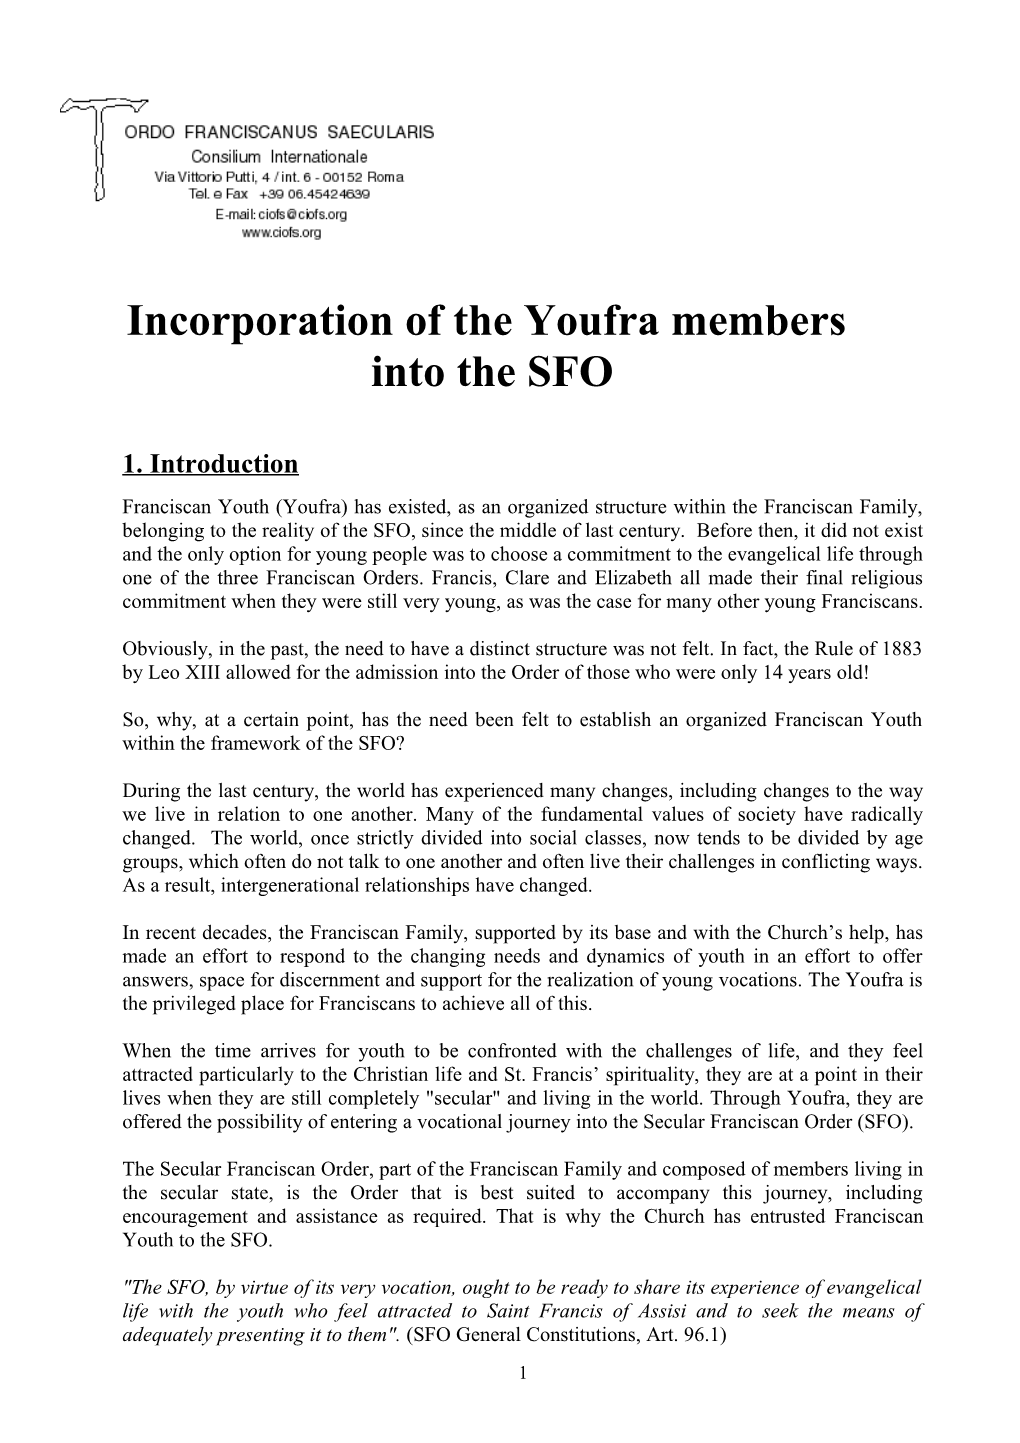 Incorporation of the Youfra Members